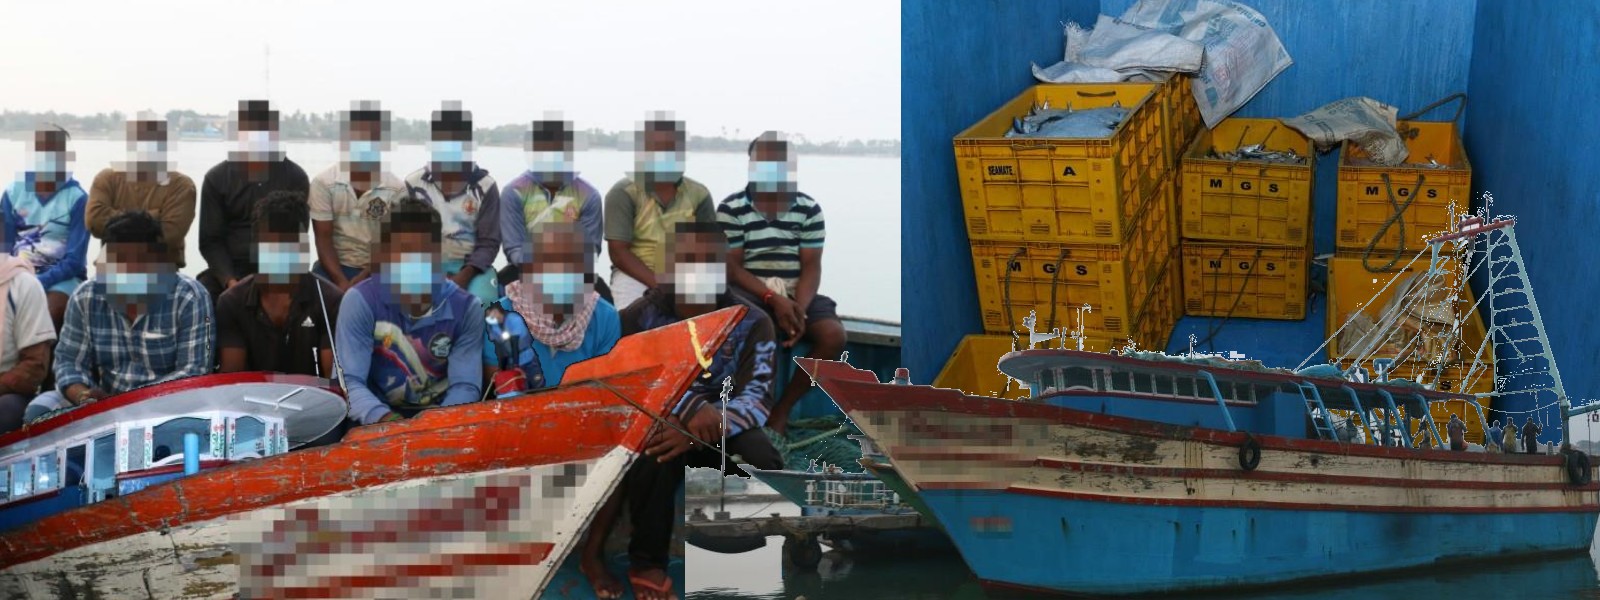 (PICTURES) Navy detains 54 Indians for poaching in Sri Lankan waters